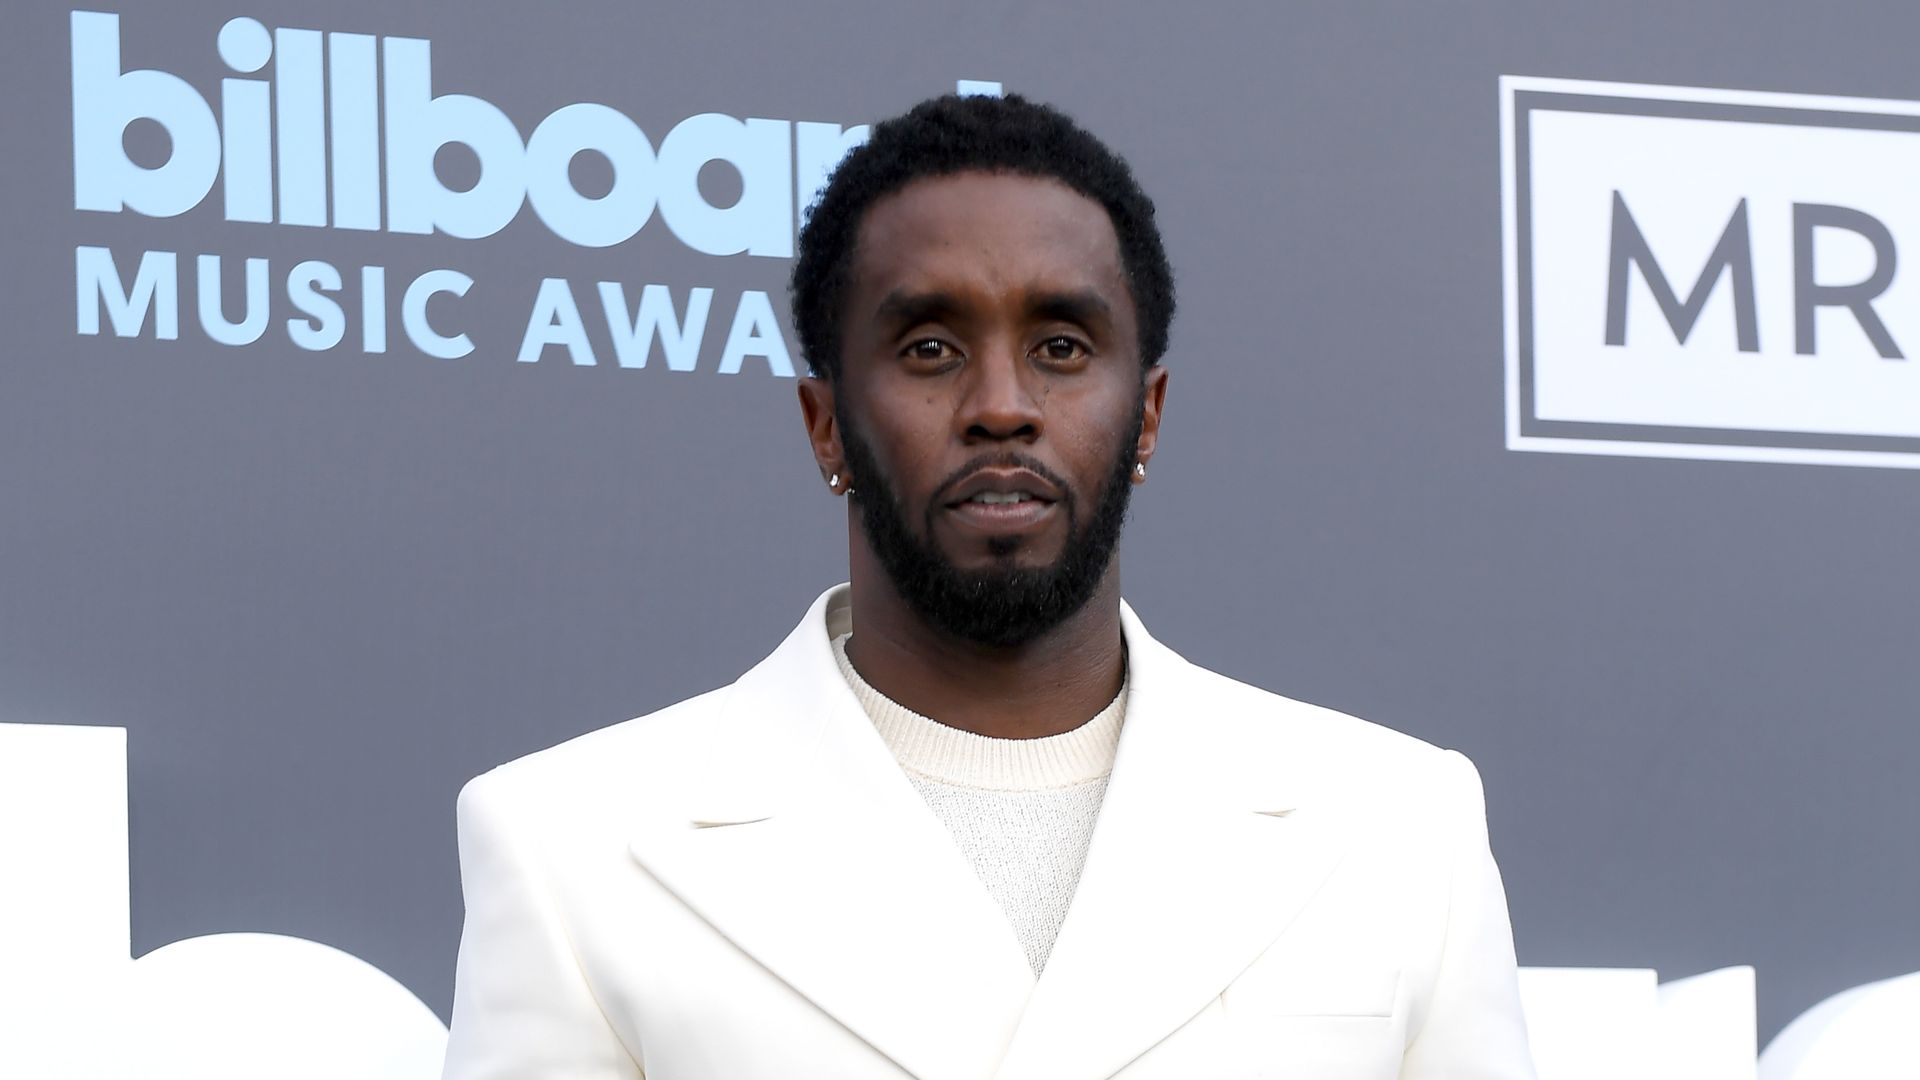 Sean "Diddy" Combs attends the 2022 Billboard Music Awards at MGM Grand Garden Arena on May 15, 2022 in Las Vegas, Nevada